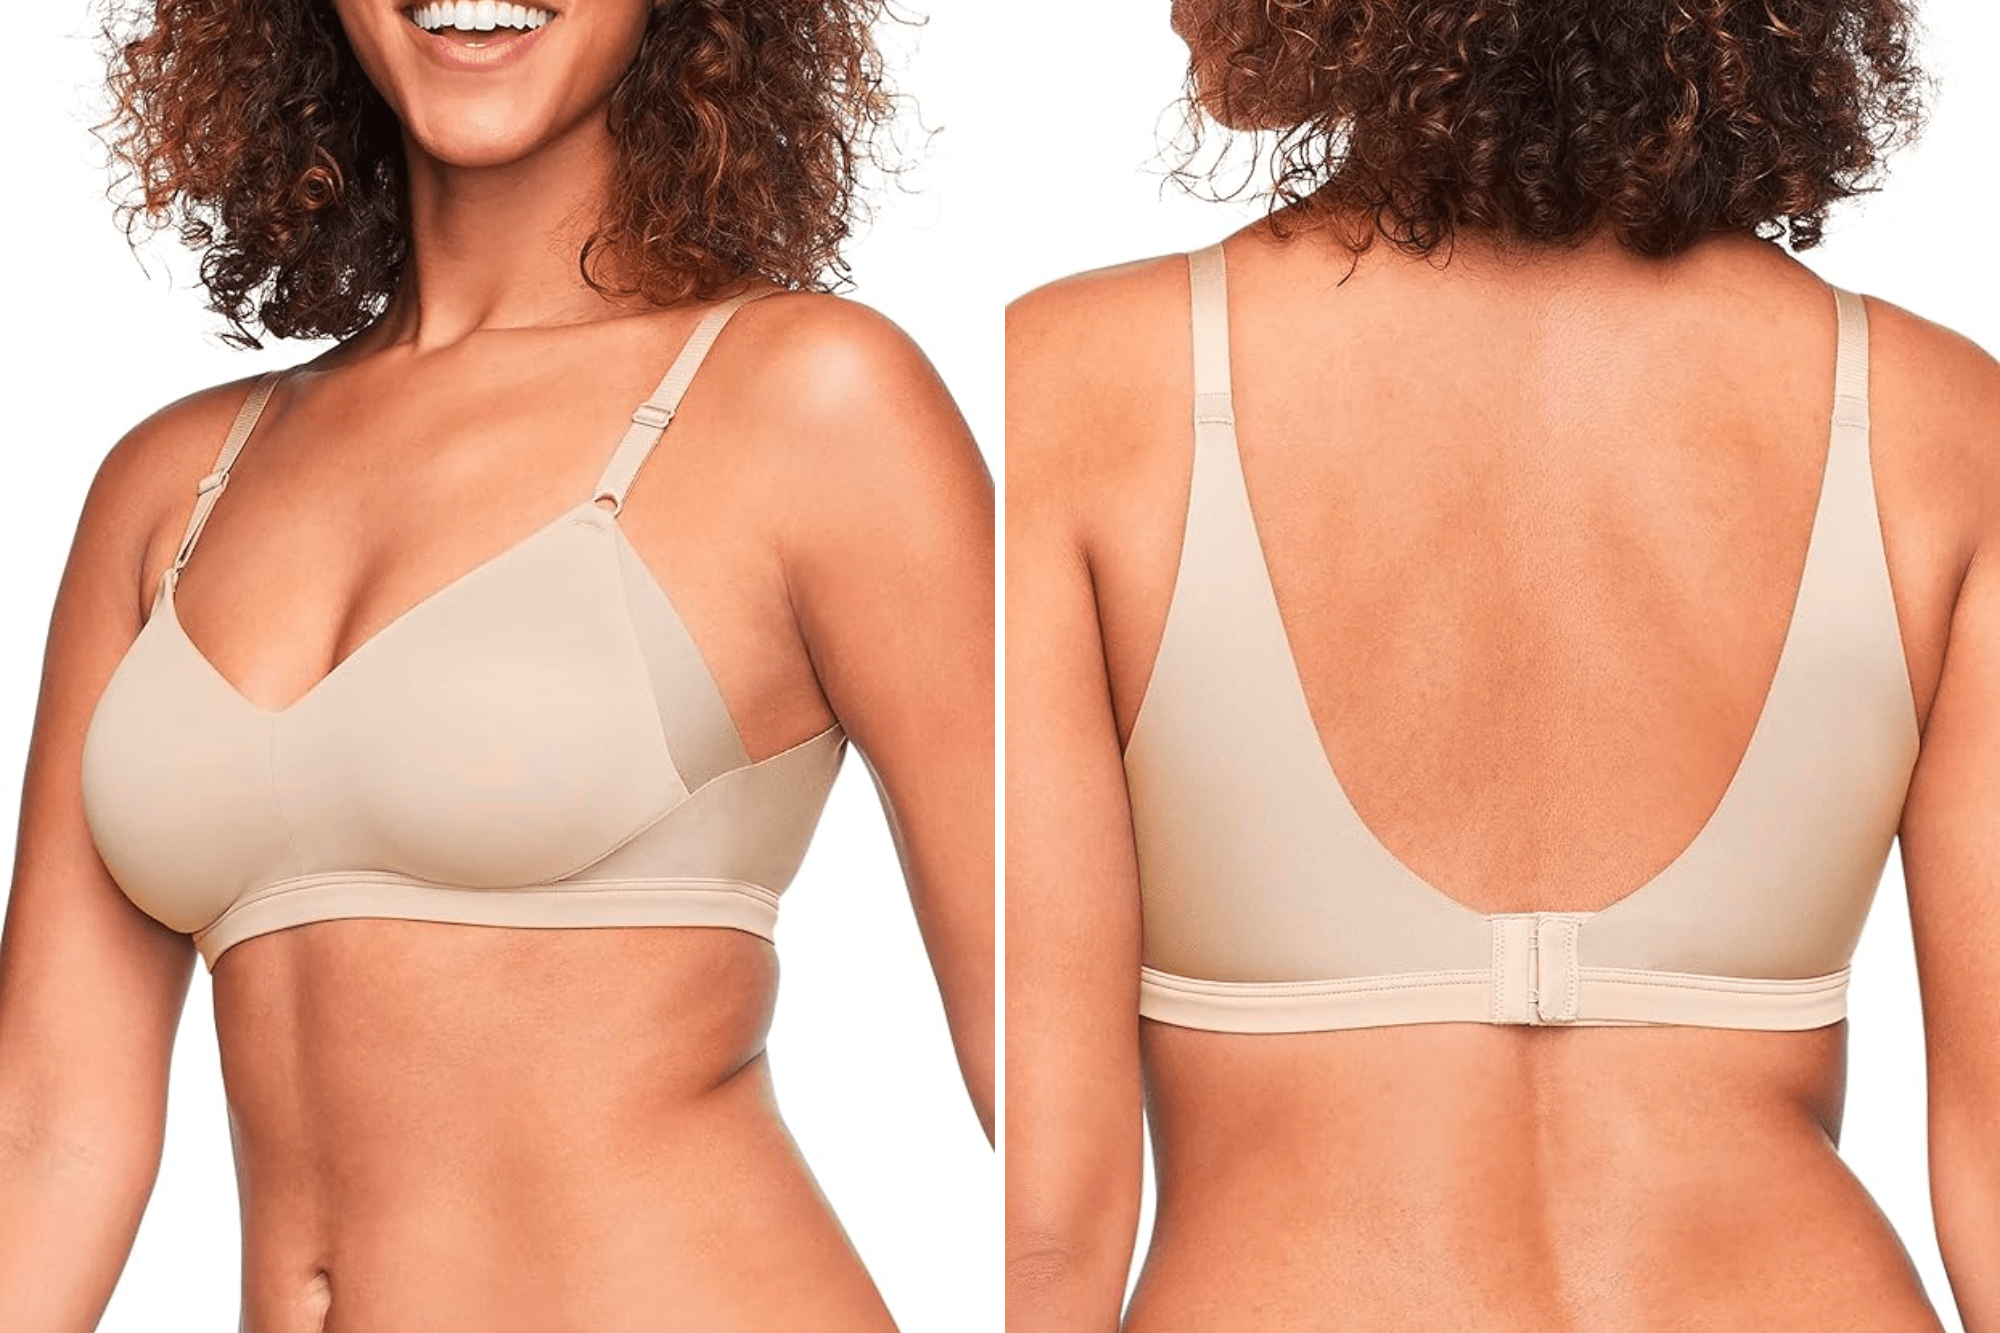 Breakout Bras - TODAY IS THE LAST DAY! Snag your grab bags